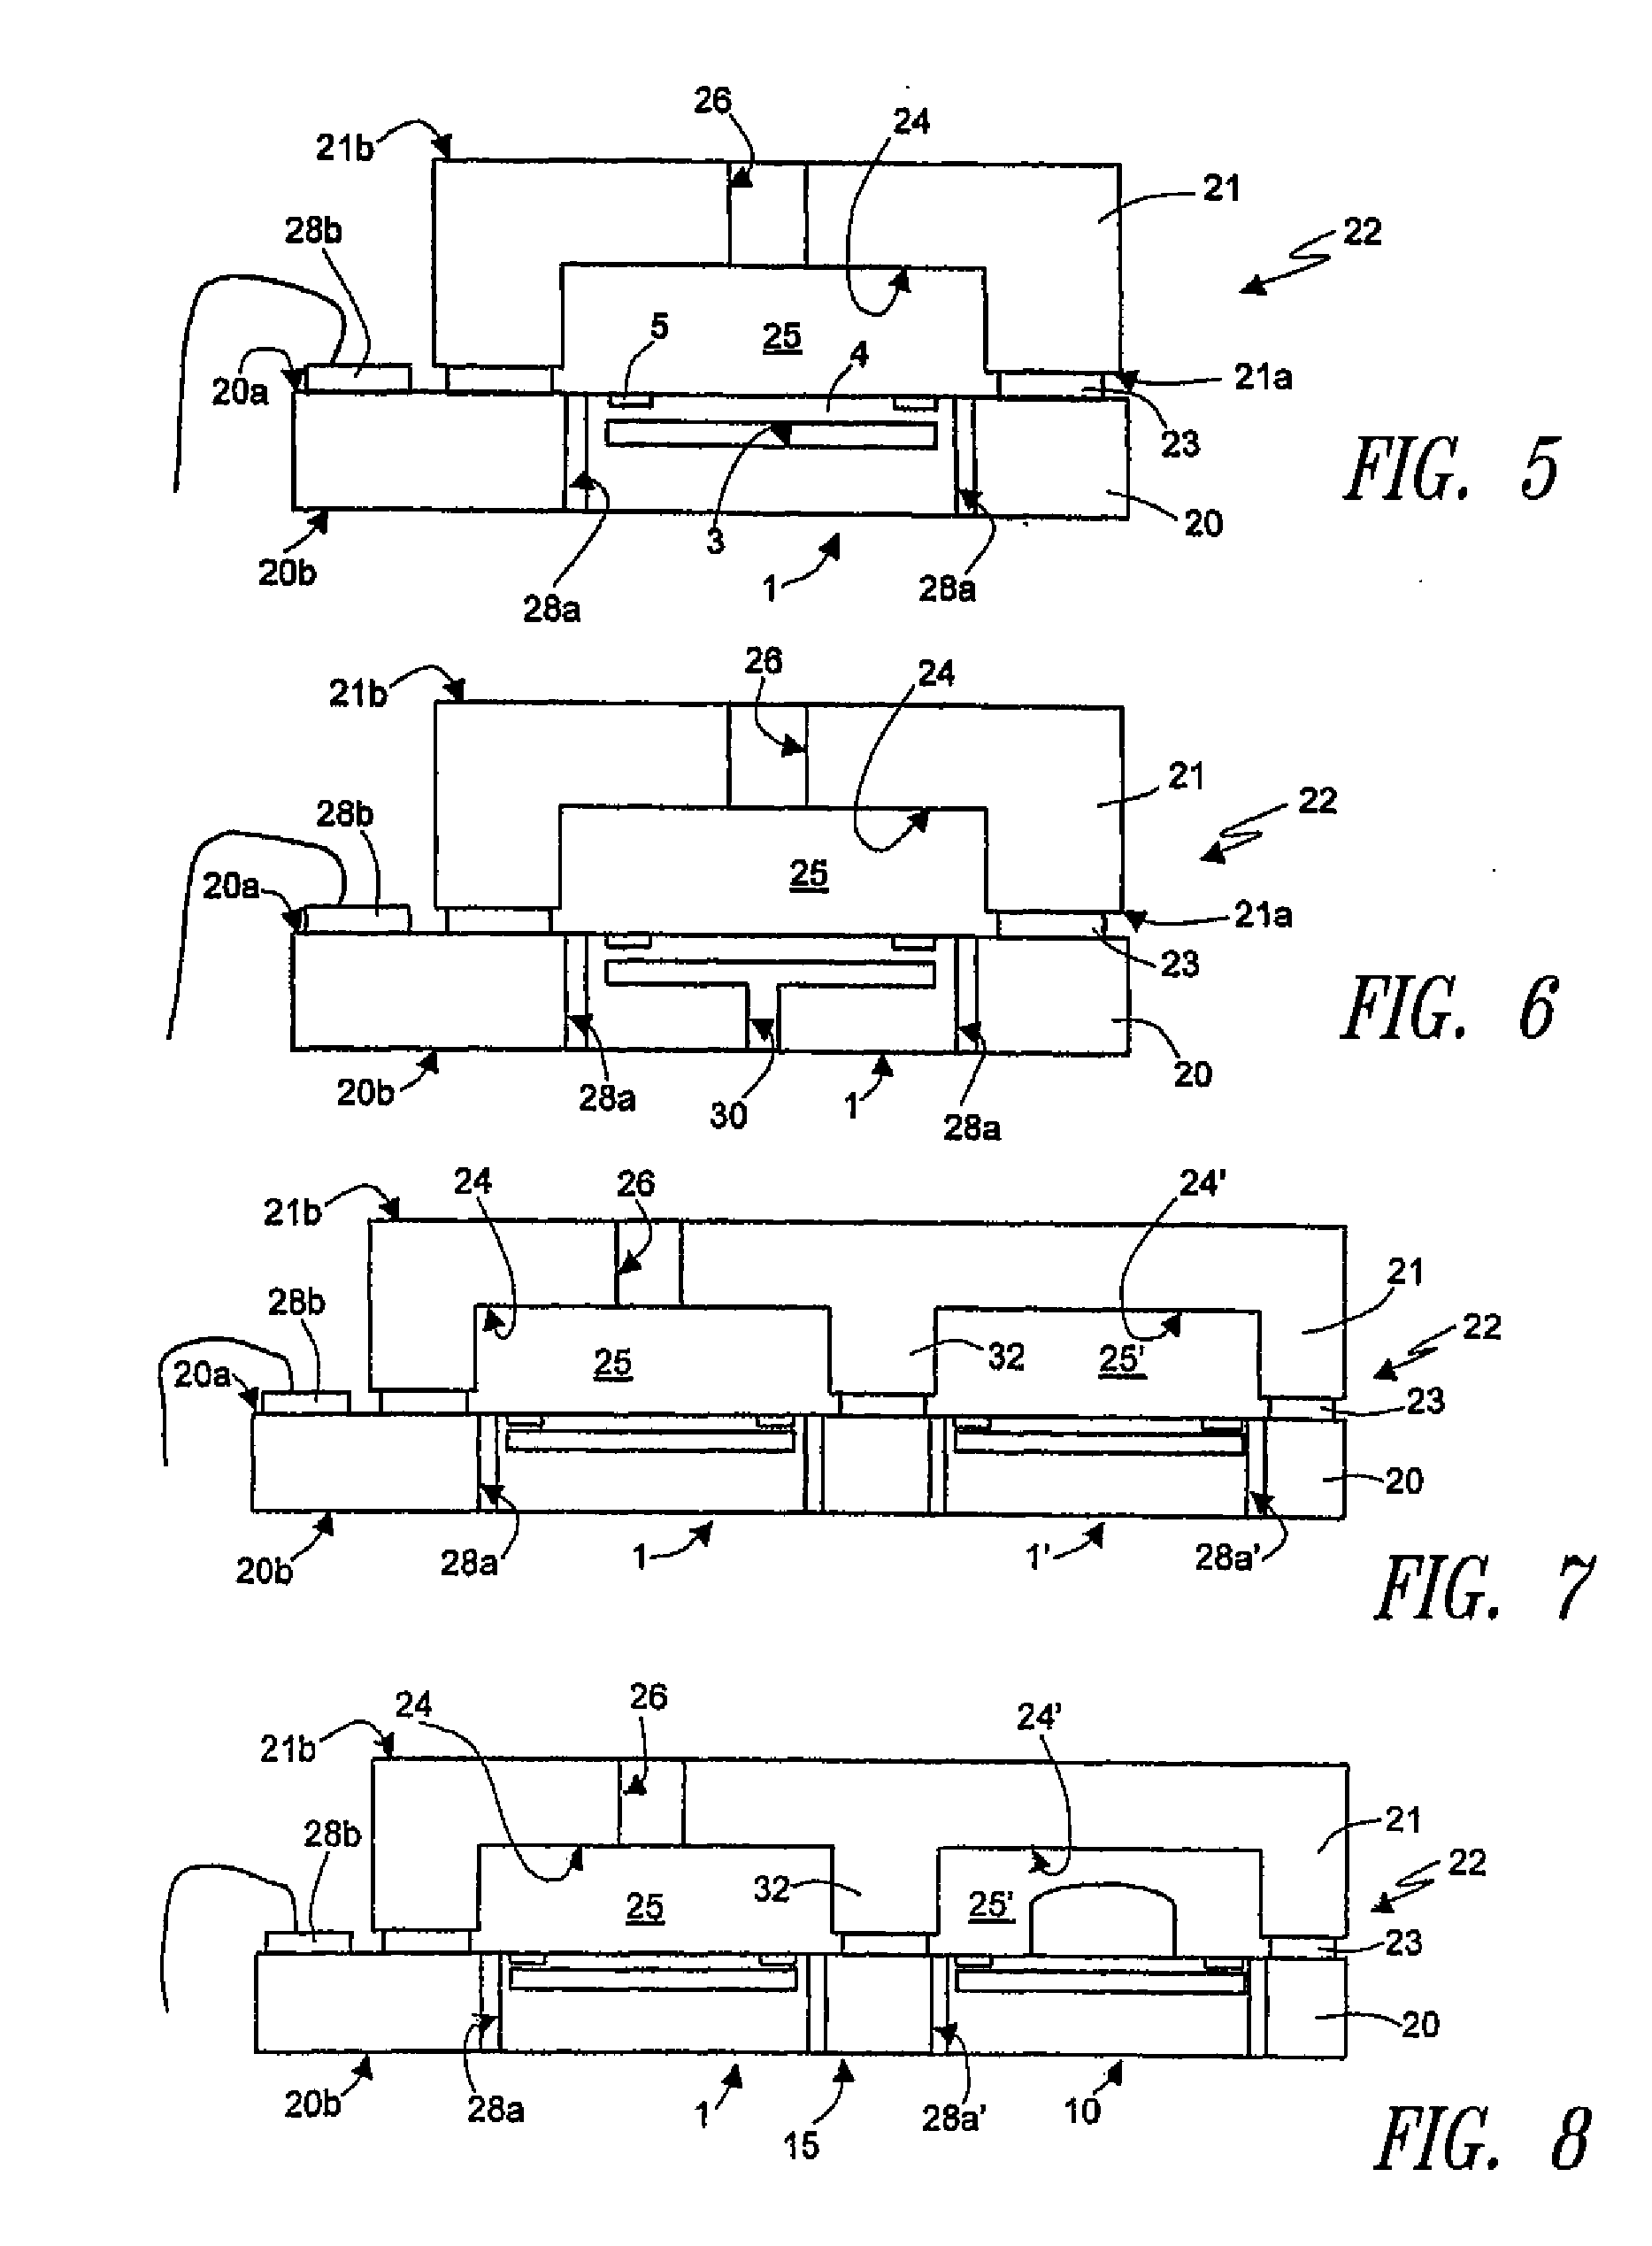 Substrate-level assembly for an integrated device, manufacturing process thereof and related integrated device